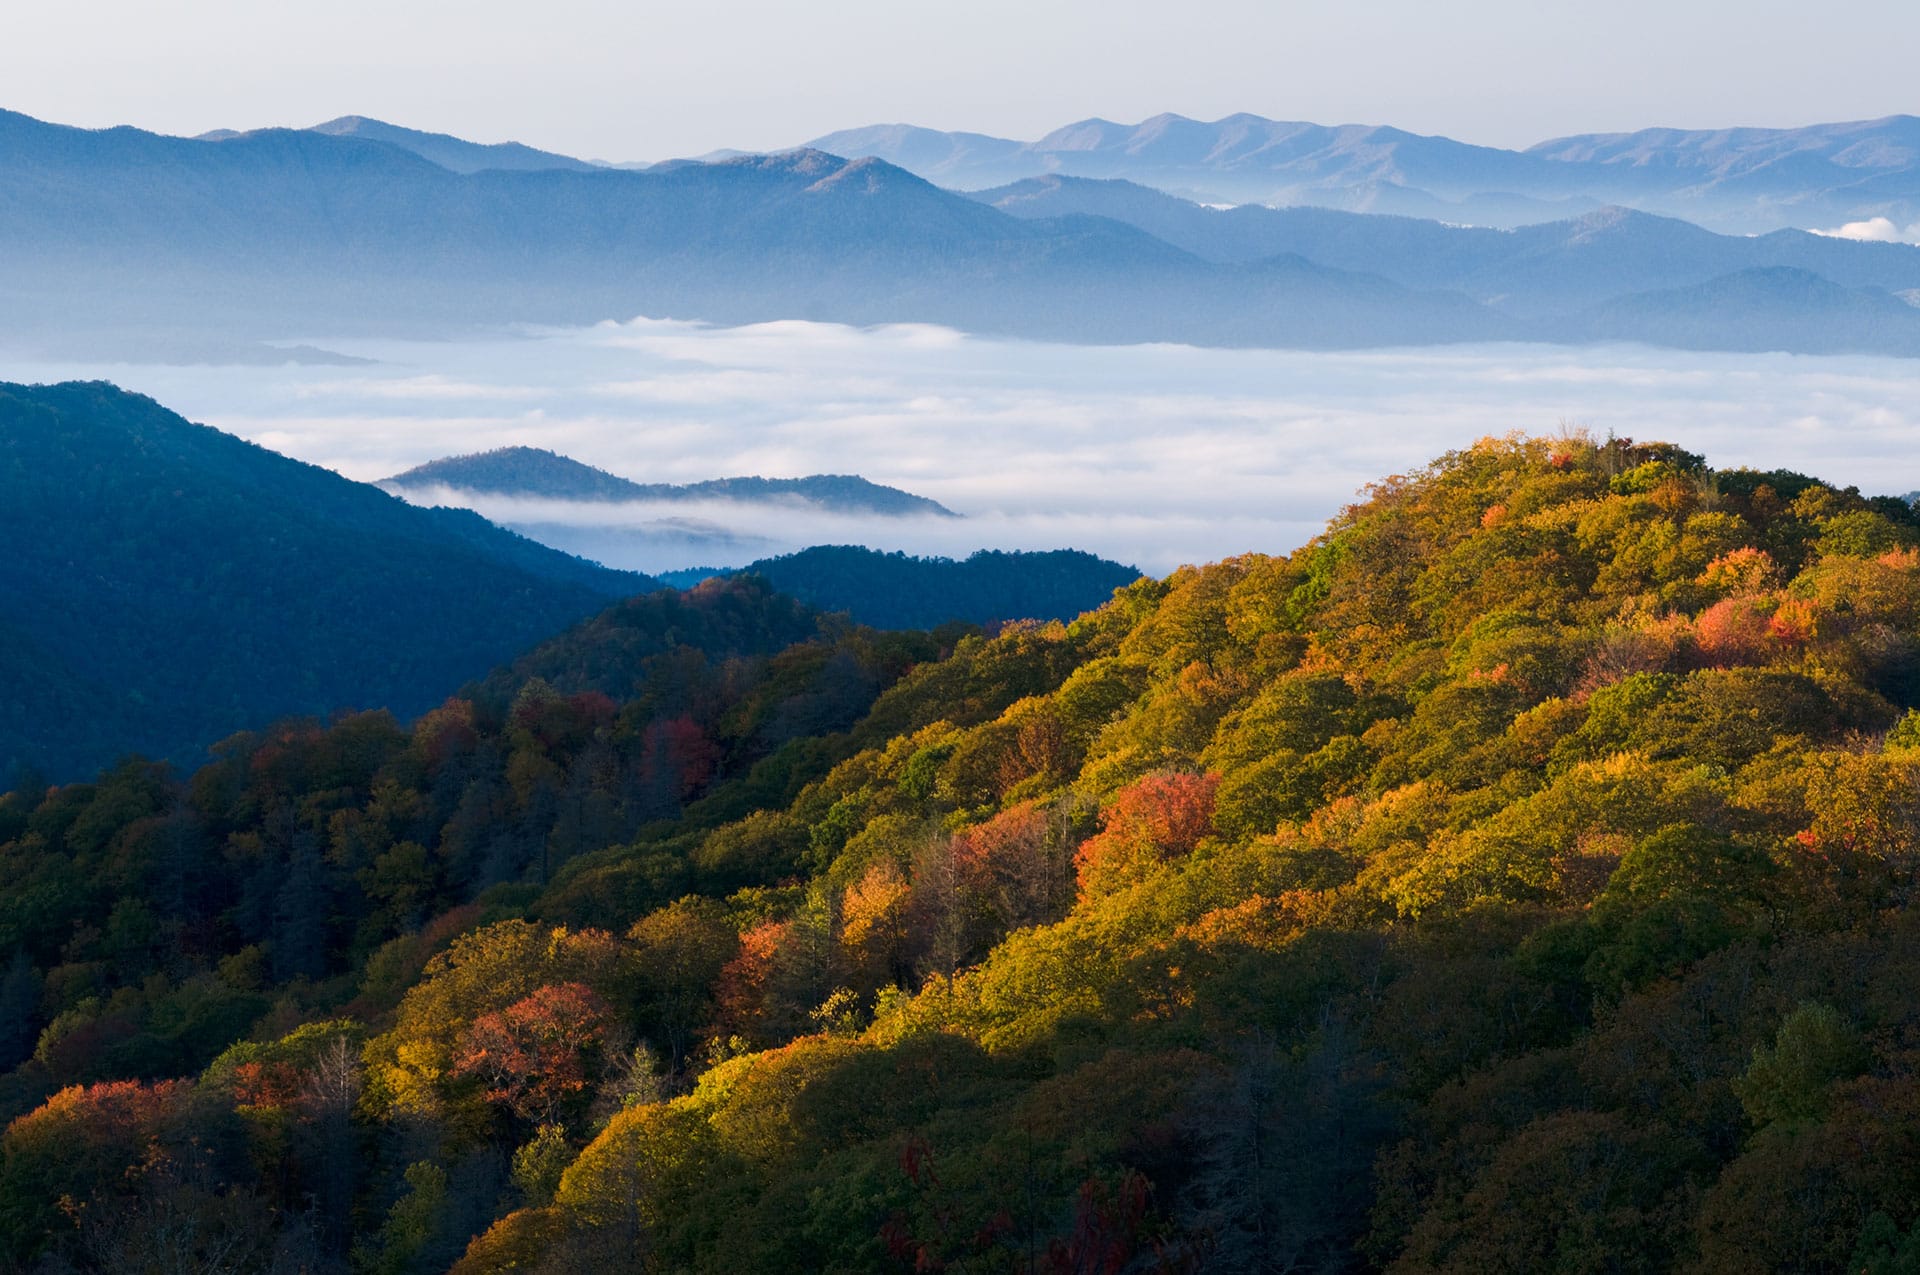 The South's Best Scenic Drive 2022: The Blue Ridge Parkway